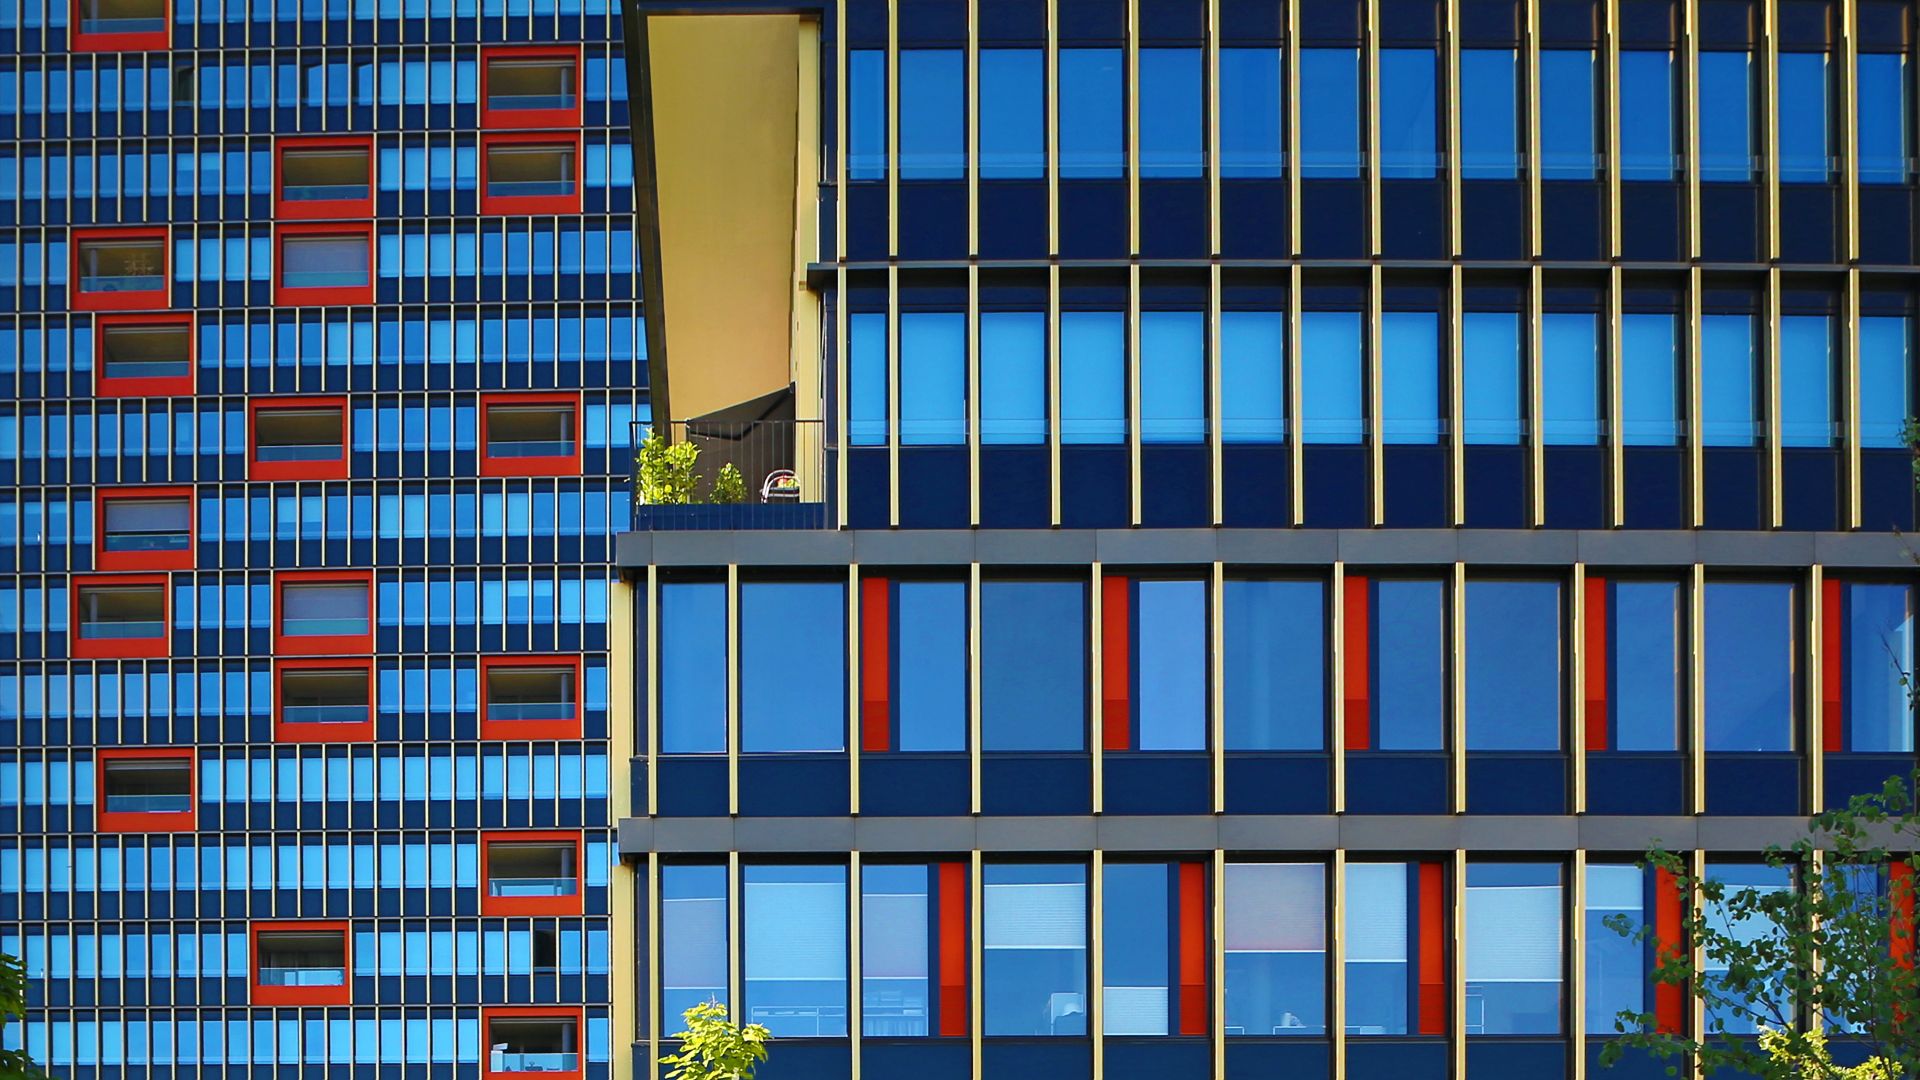 Highrise red and yellow facade with weather sealing glazing